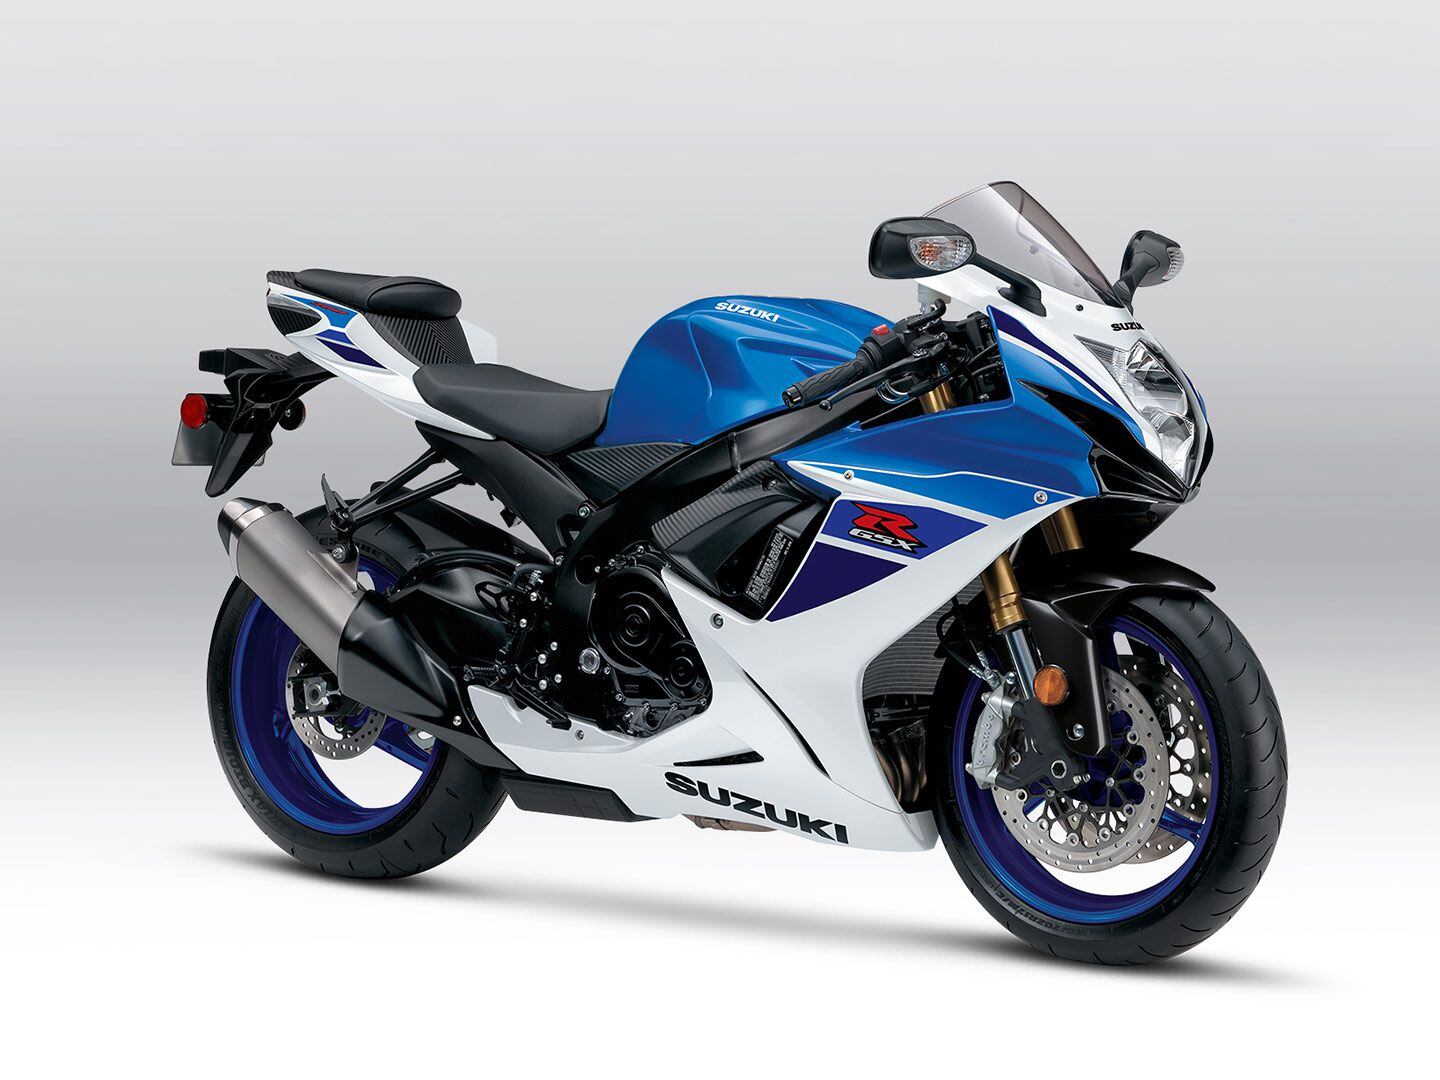 Suzuki doesn’t do much lifestyle photography, but it passes the savings on to you. The 2024 Suzuki GSX-R750 in Pearl Brilliant White/Metallic Triton Blue.